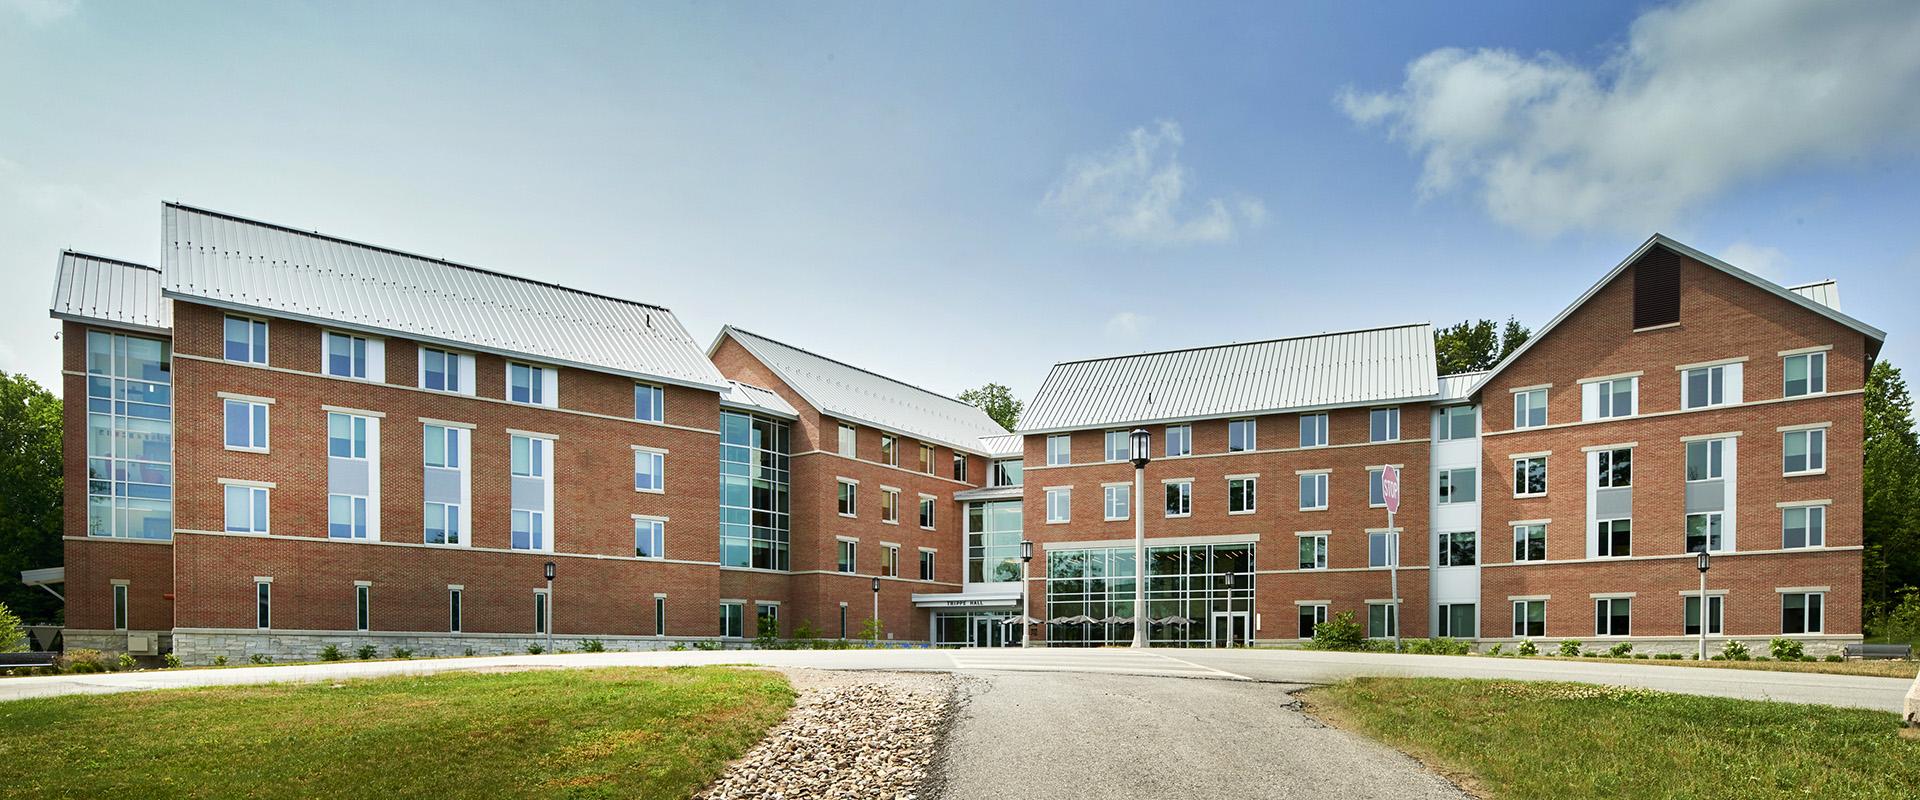 Trippe Hall exterior wide shot